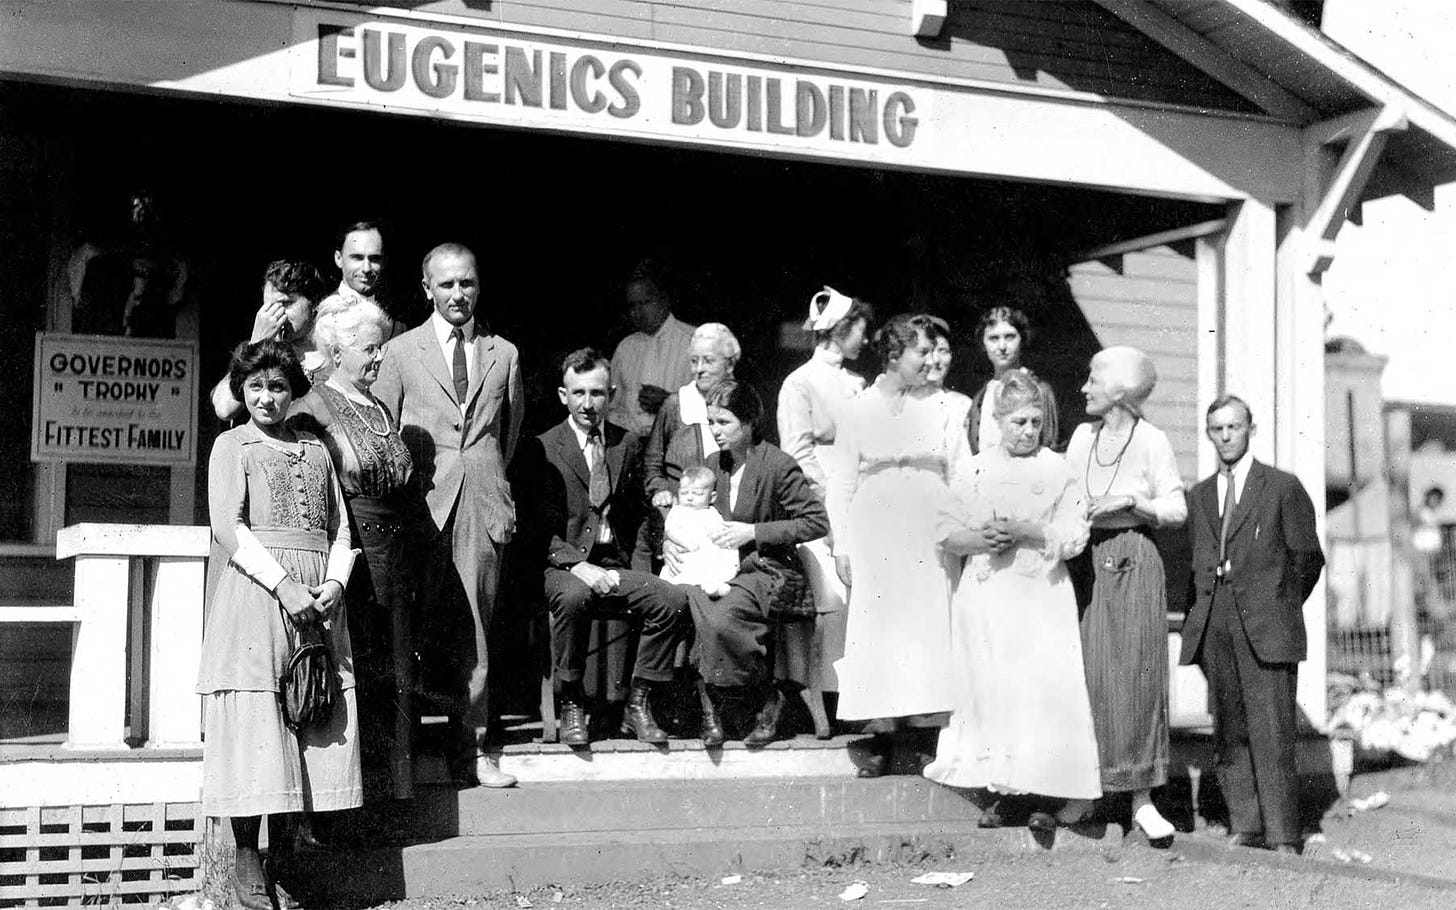 Black and white photo of a group of people standing outside a structure with a sign that reads "Eugenics Building."